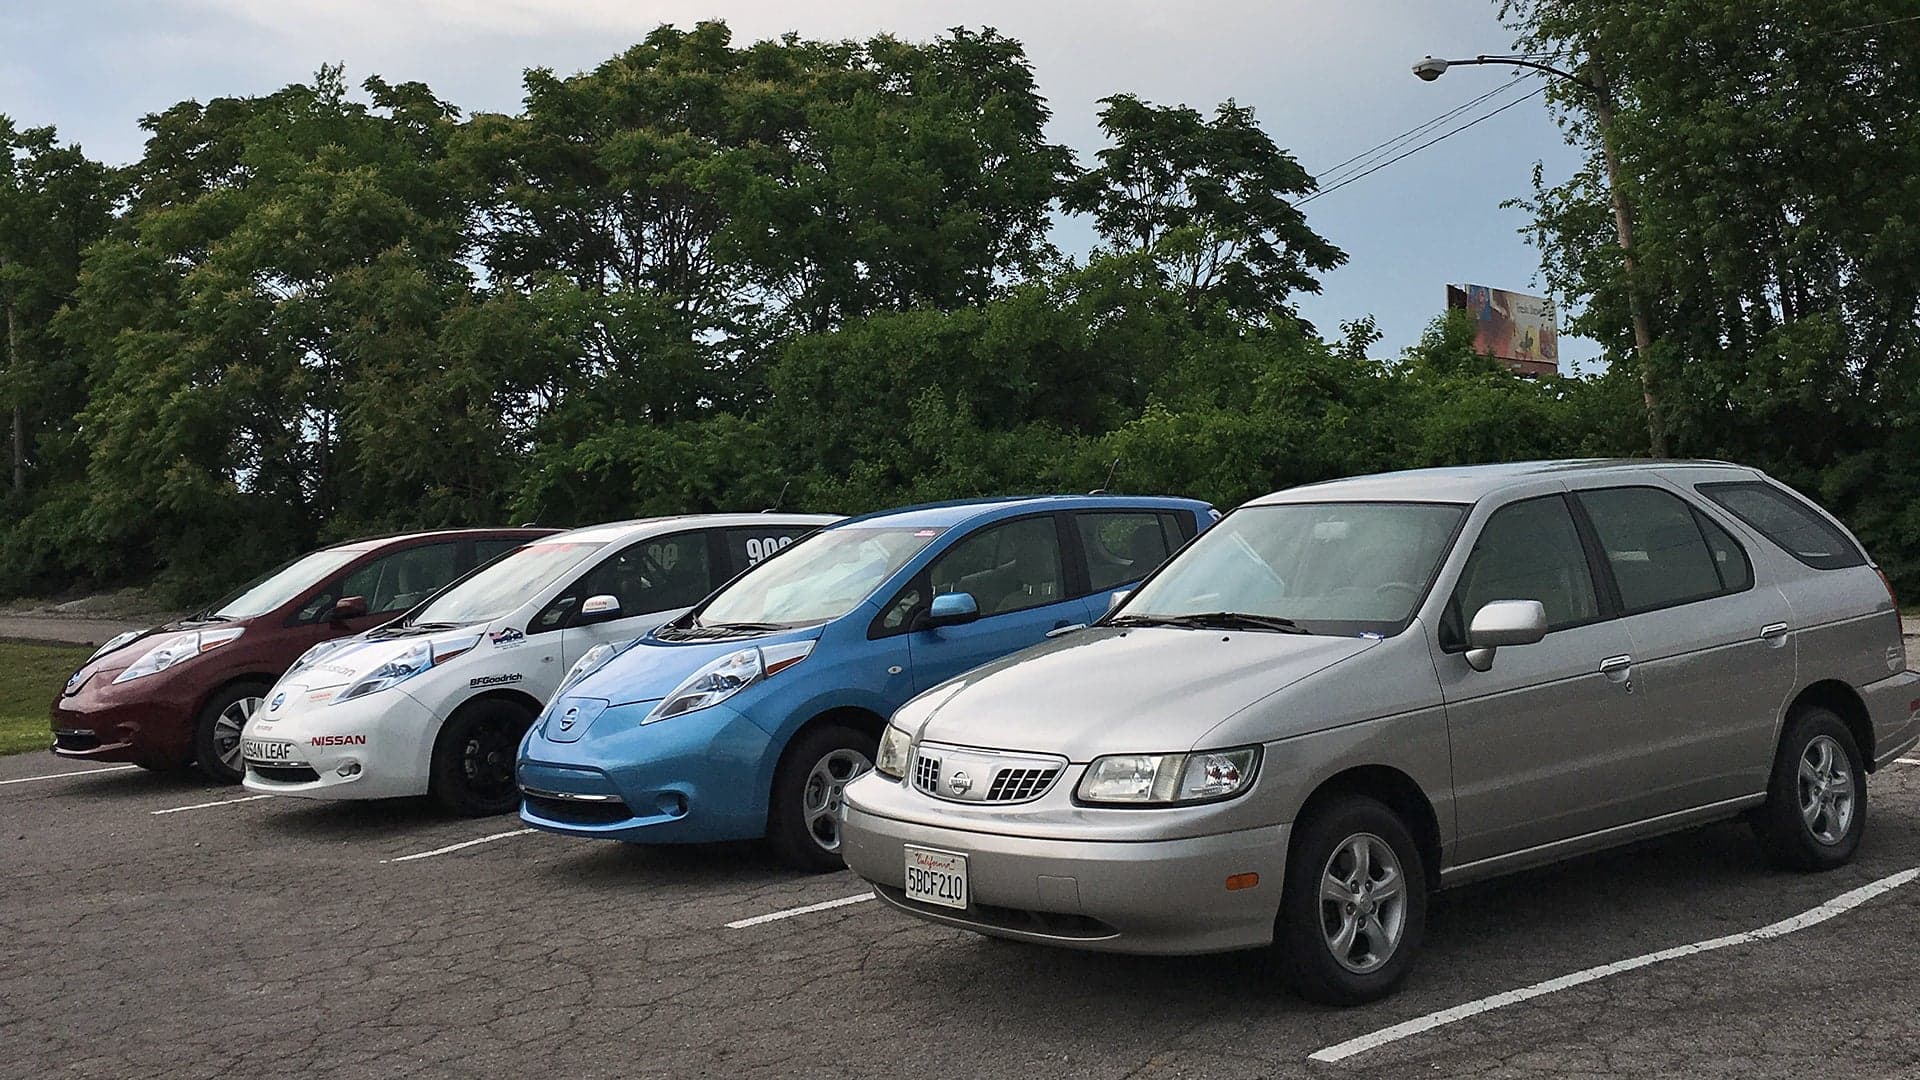 Learning to Love the Nissan Leaf, by Way of Nissan’s Earlier Electric Vehicles